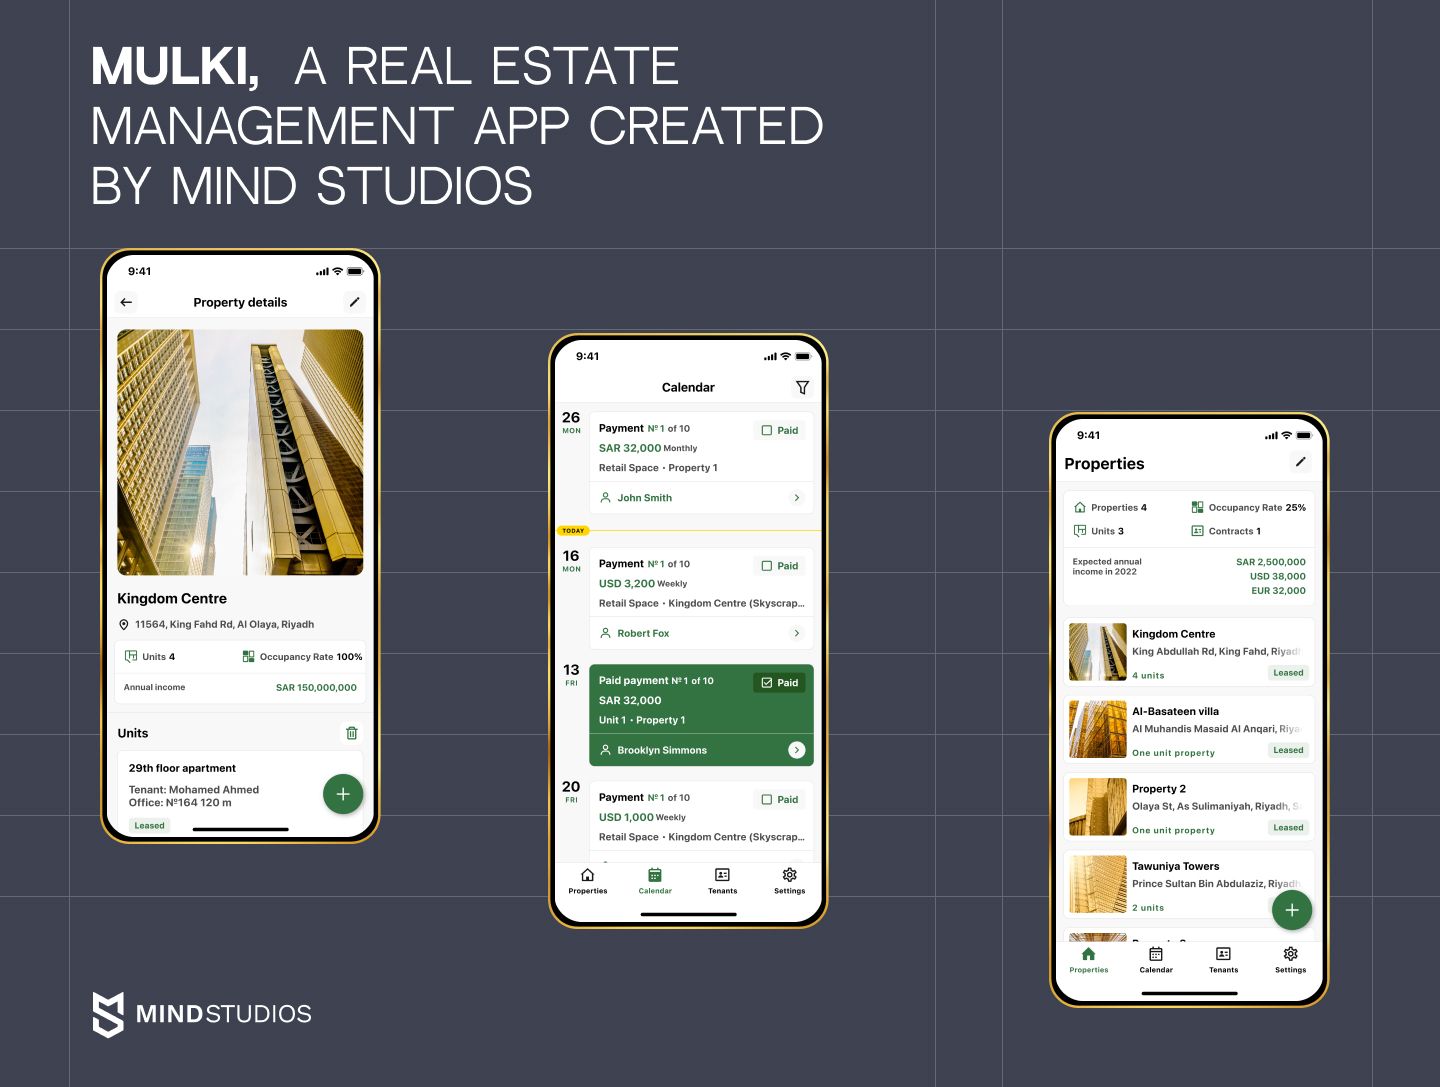 Mulki, a real estate management app created by Mind Studios